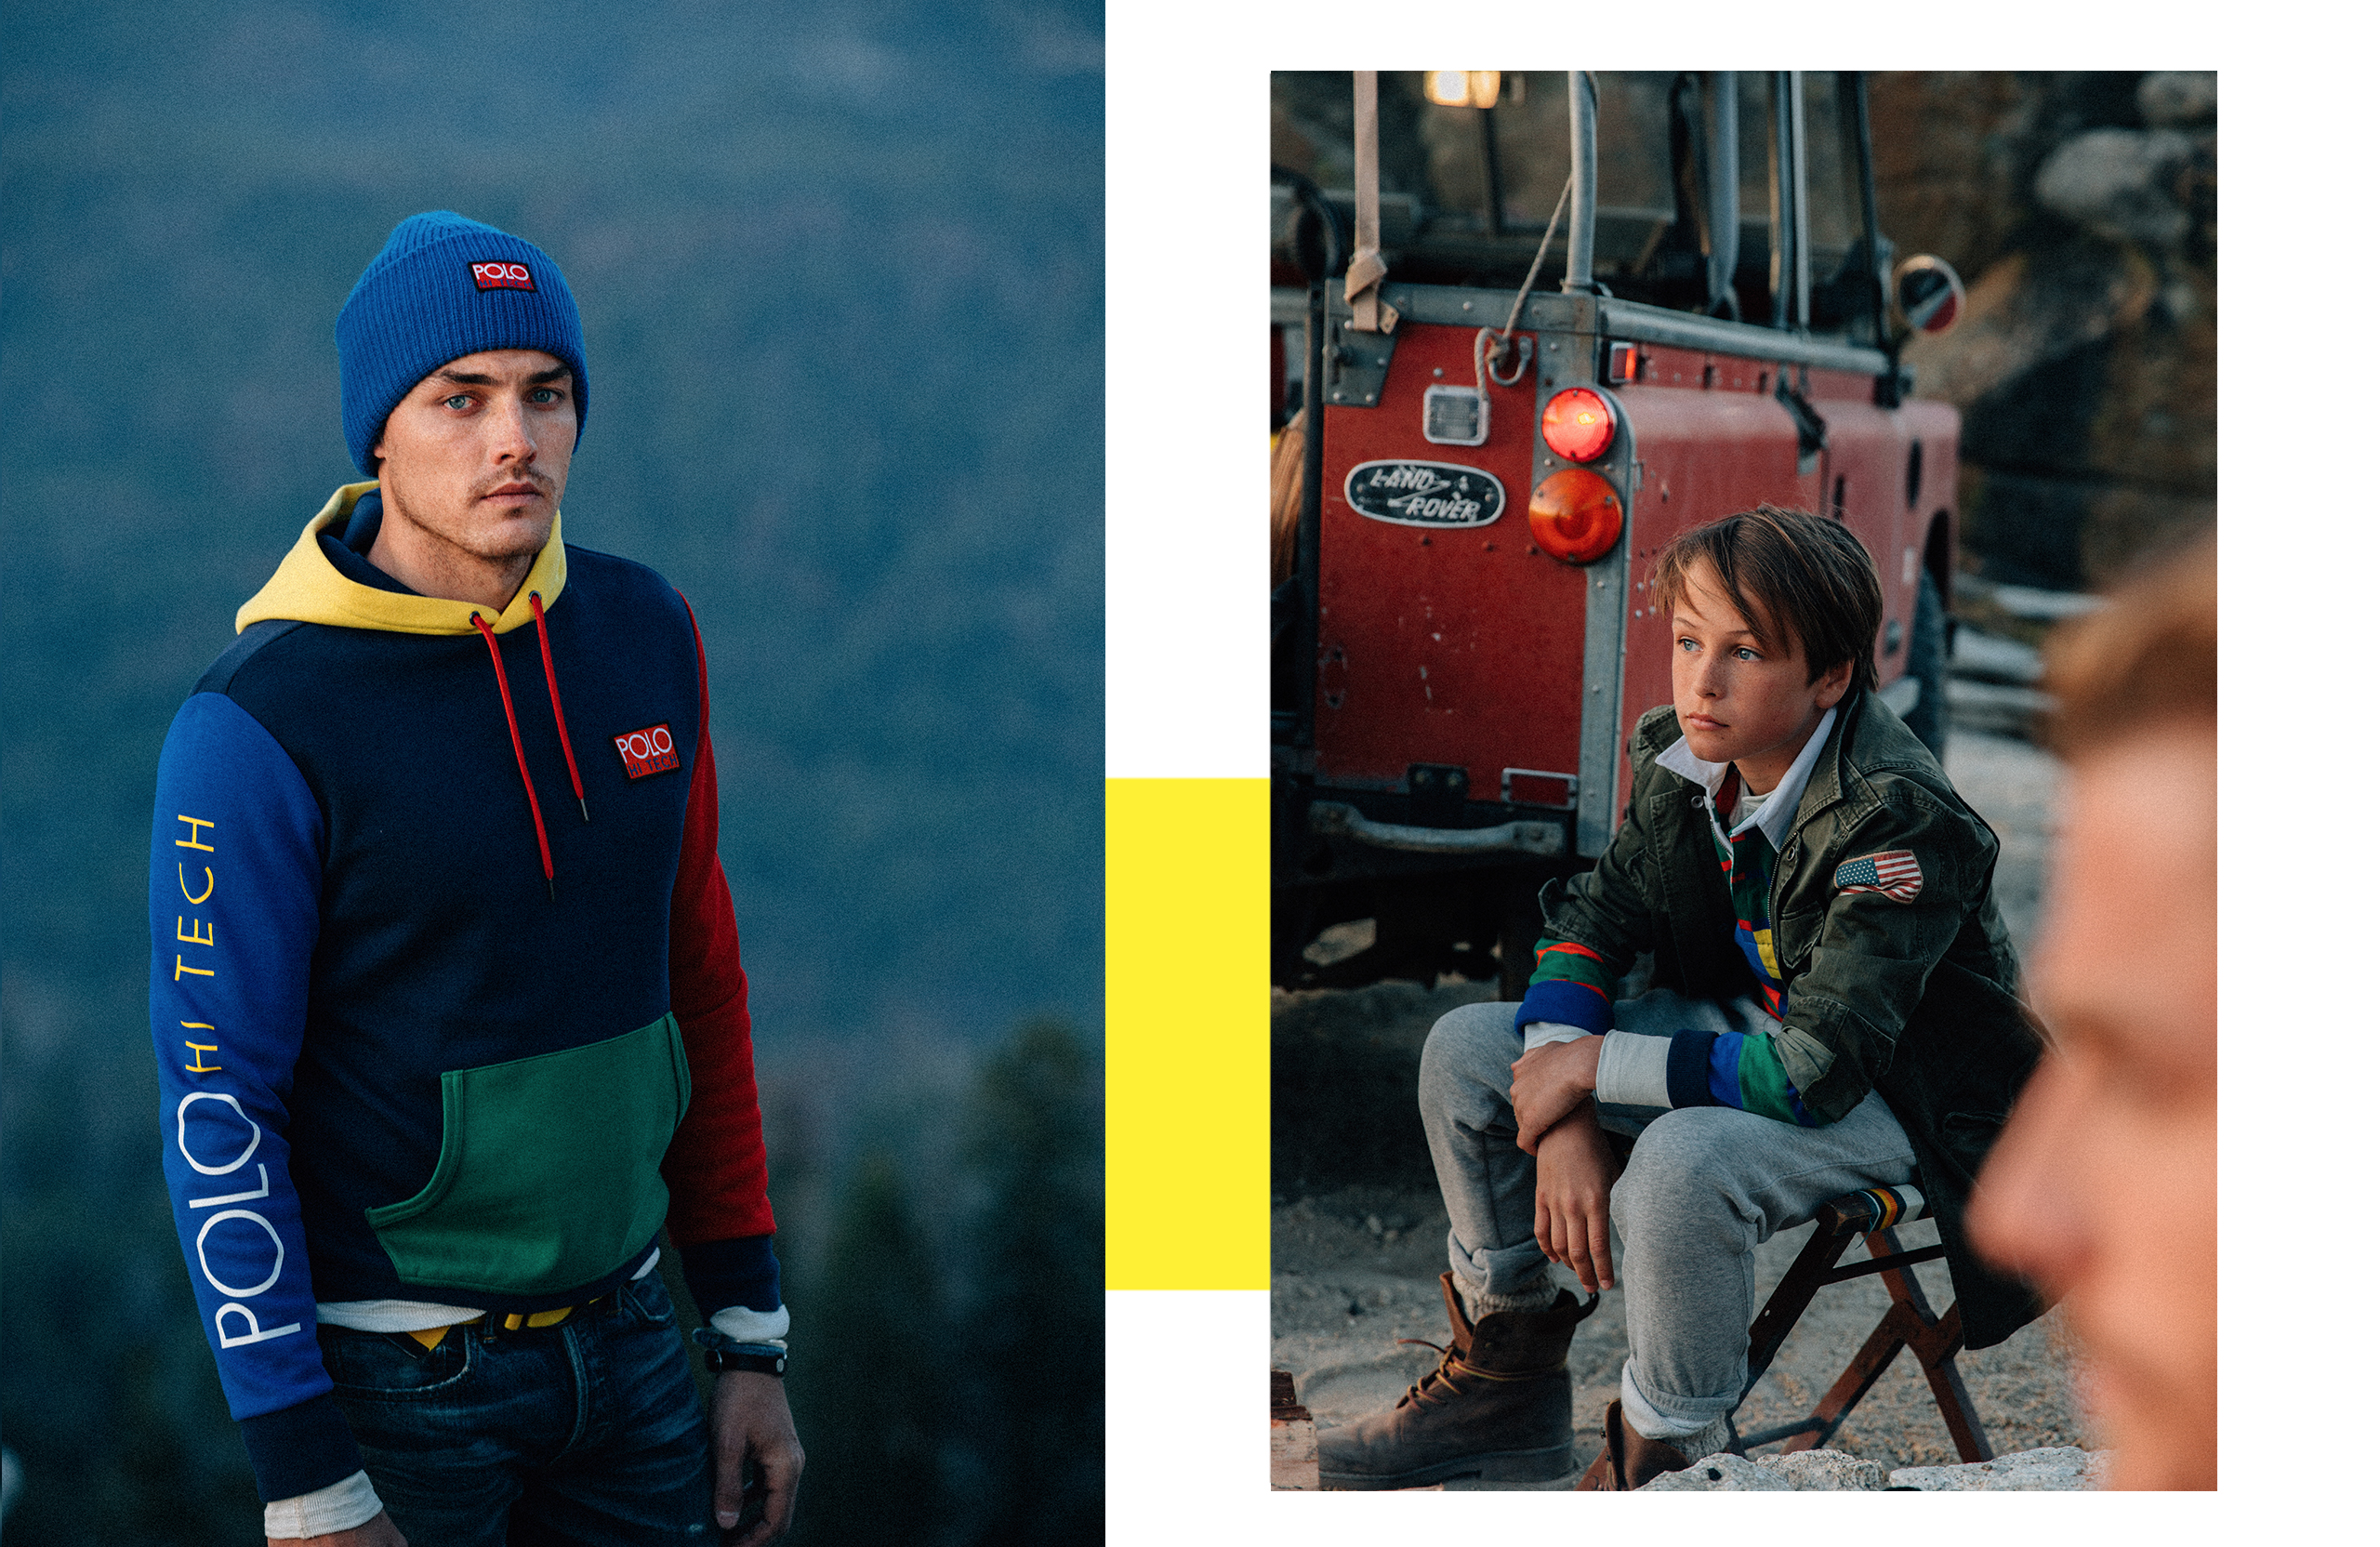 The Fall 2018 Polo Hi Tech collection, photographed in Yosemite National Park by Tom Gould.